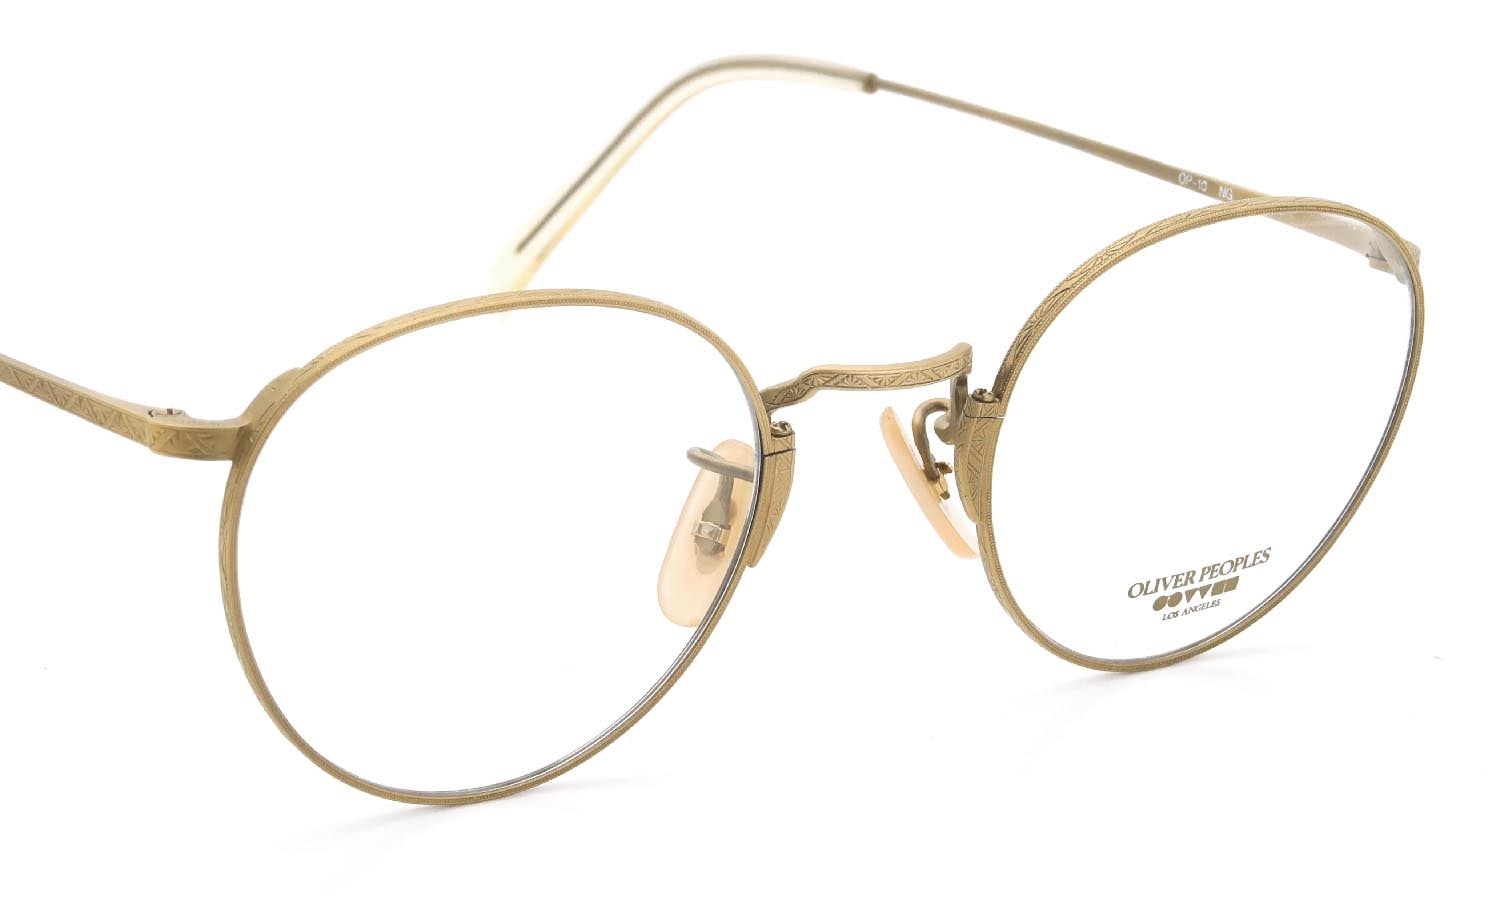 OLIVER PEOPLES 1990's OP-10 NG